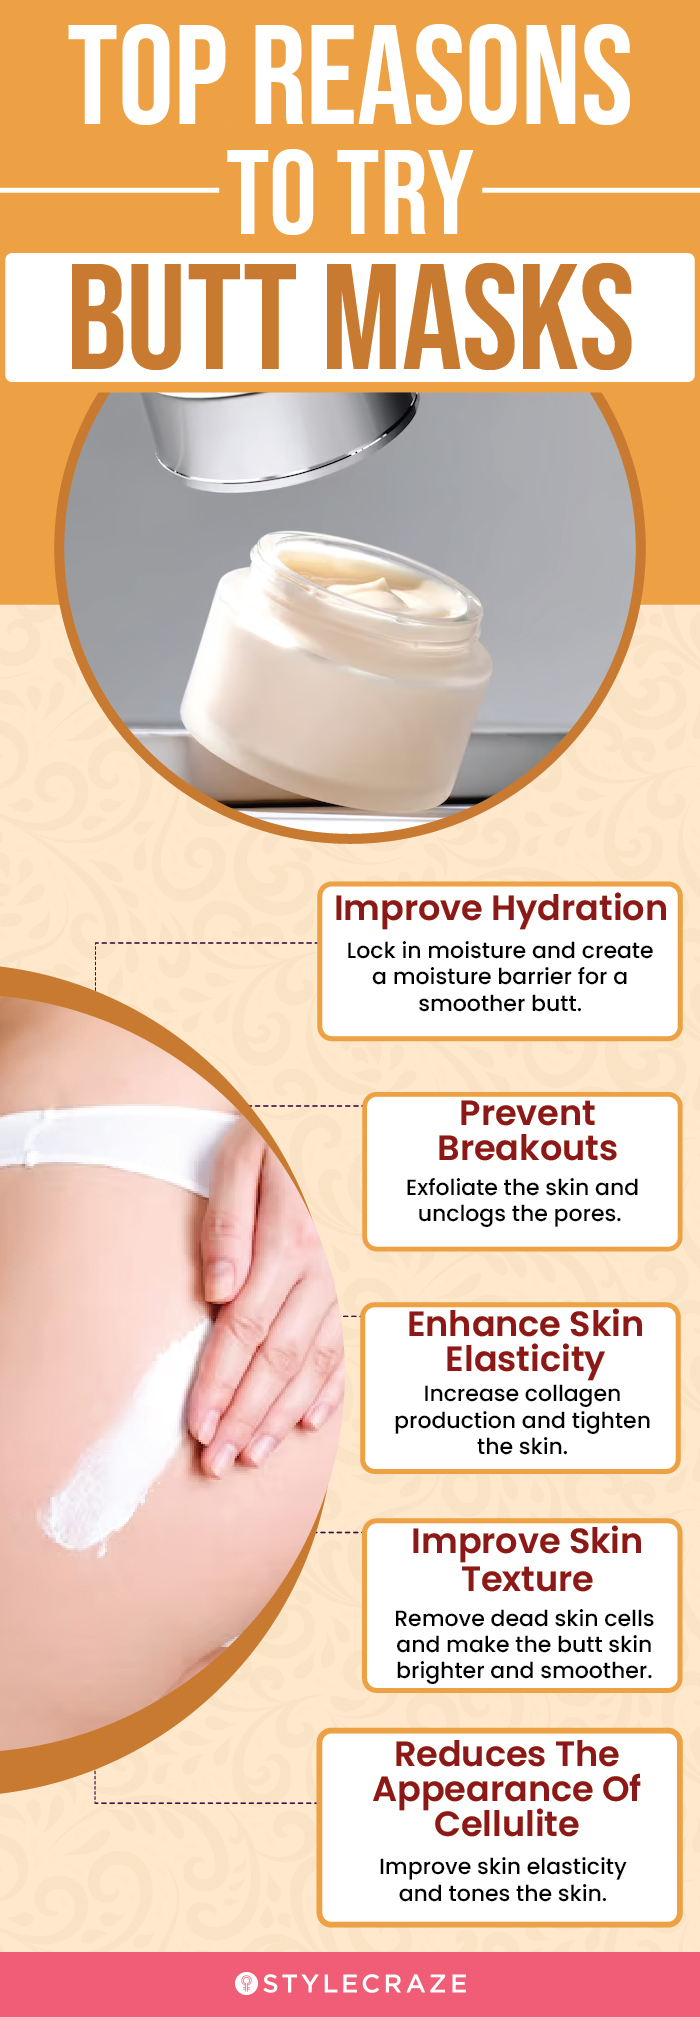 Top Reasons To Try Butt Masks (infographic)